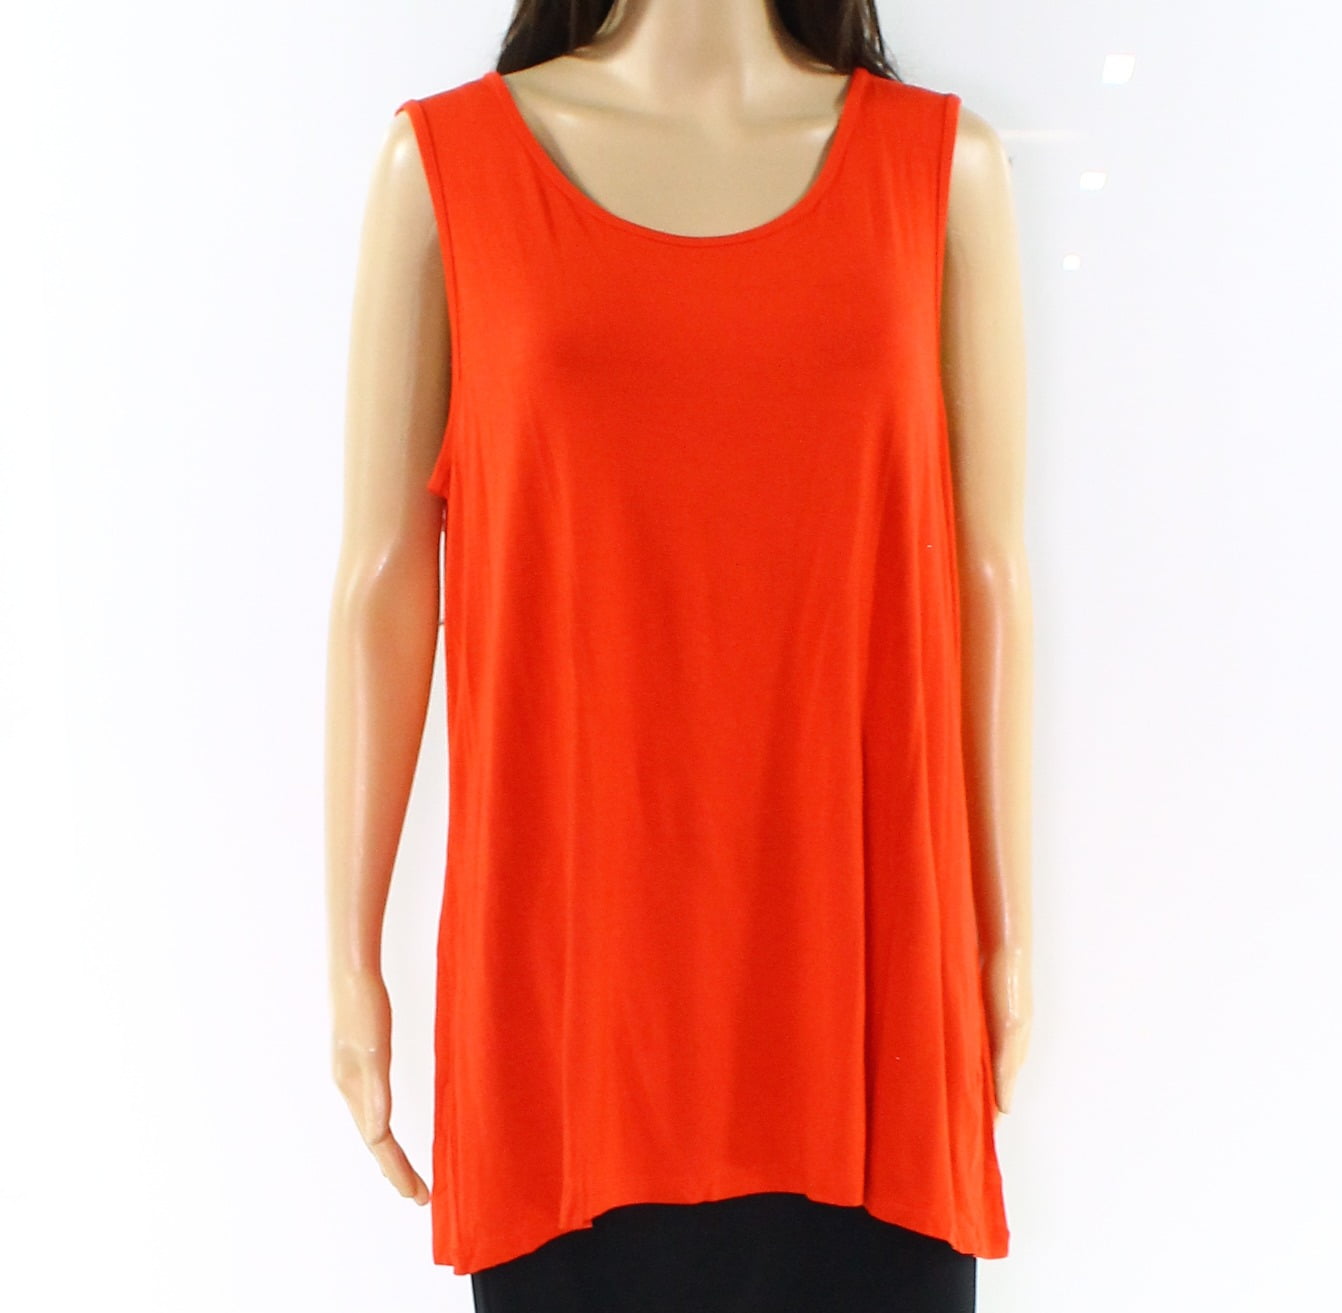 Multiples Clothing Co. - Women's Petite Scoop Neck Stretch Tank Top PXL ...